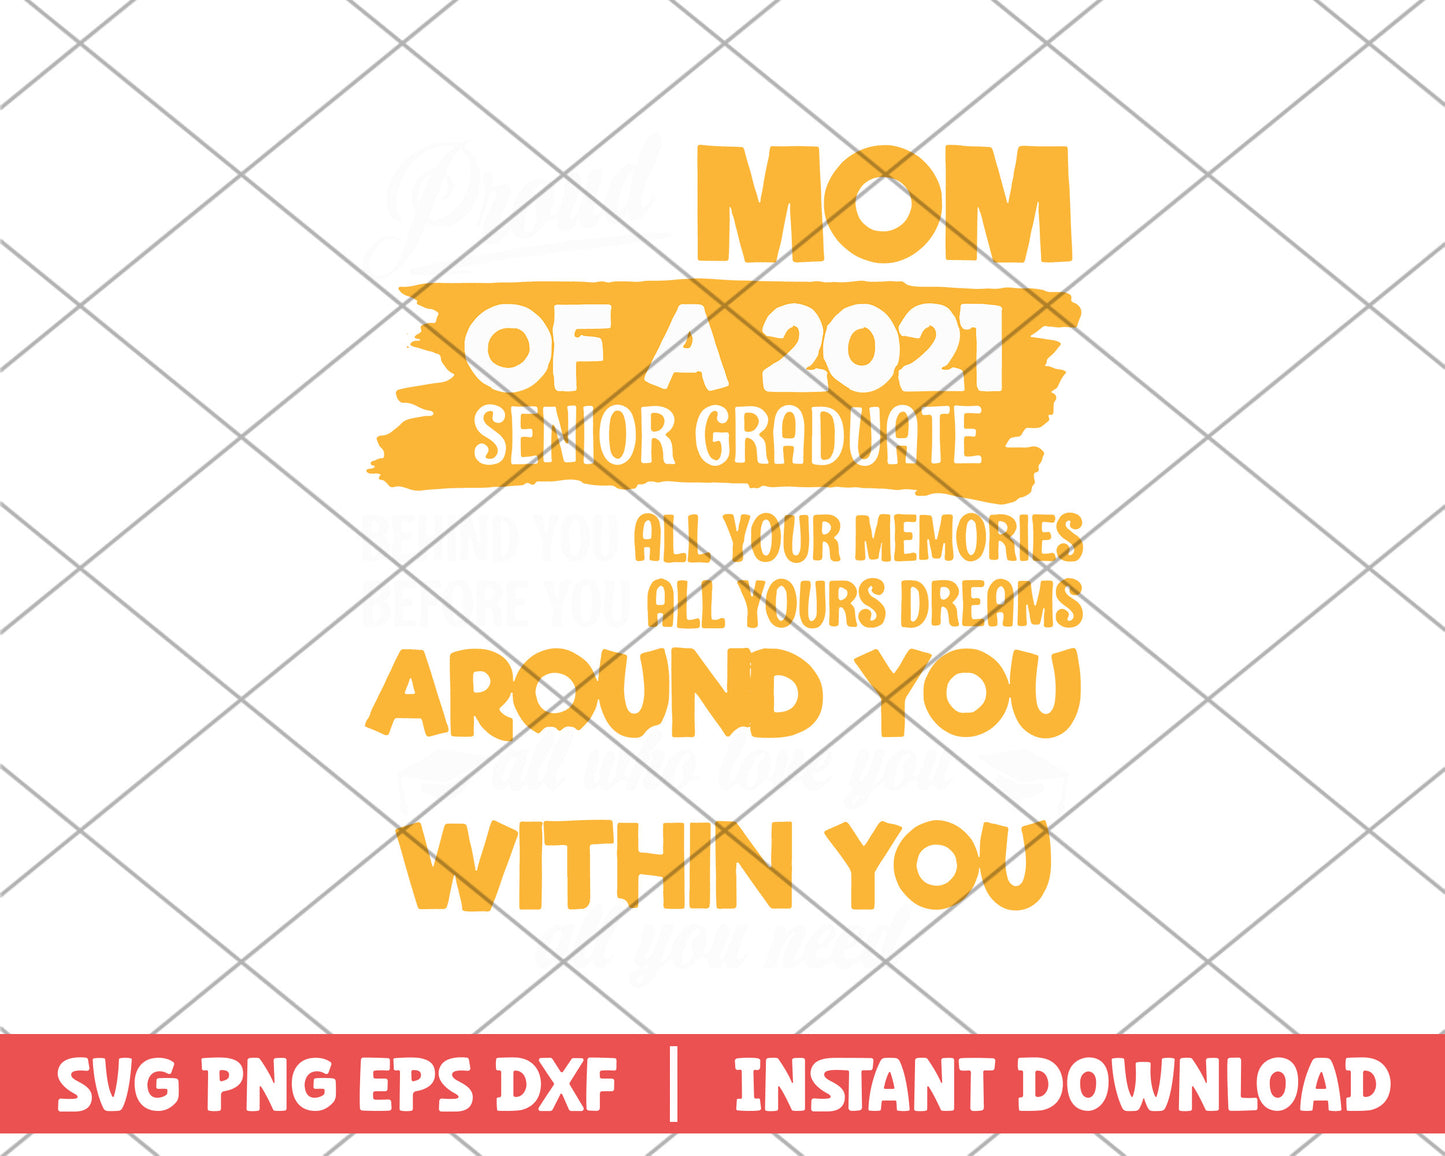 Mom of a 2021 senior graduate mothers day svg